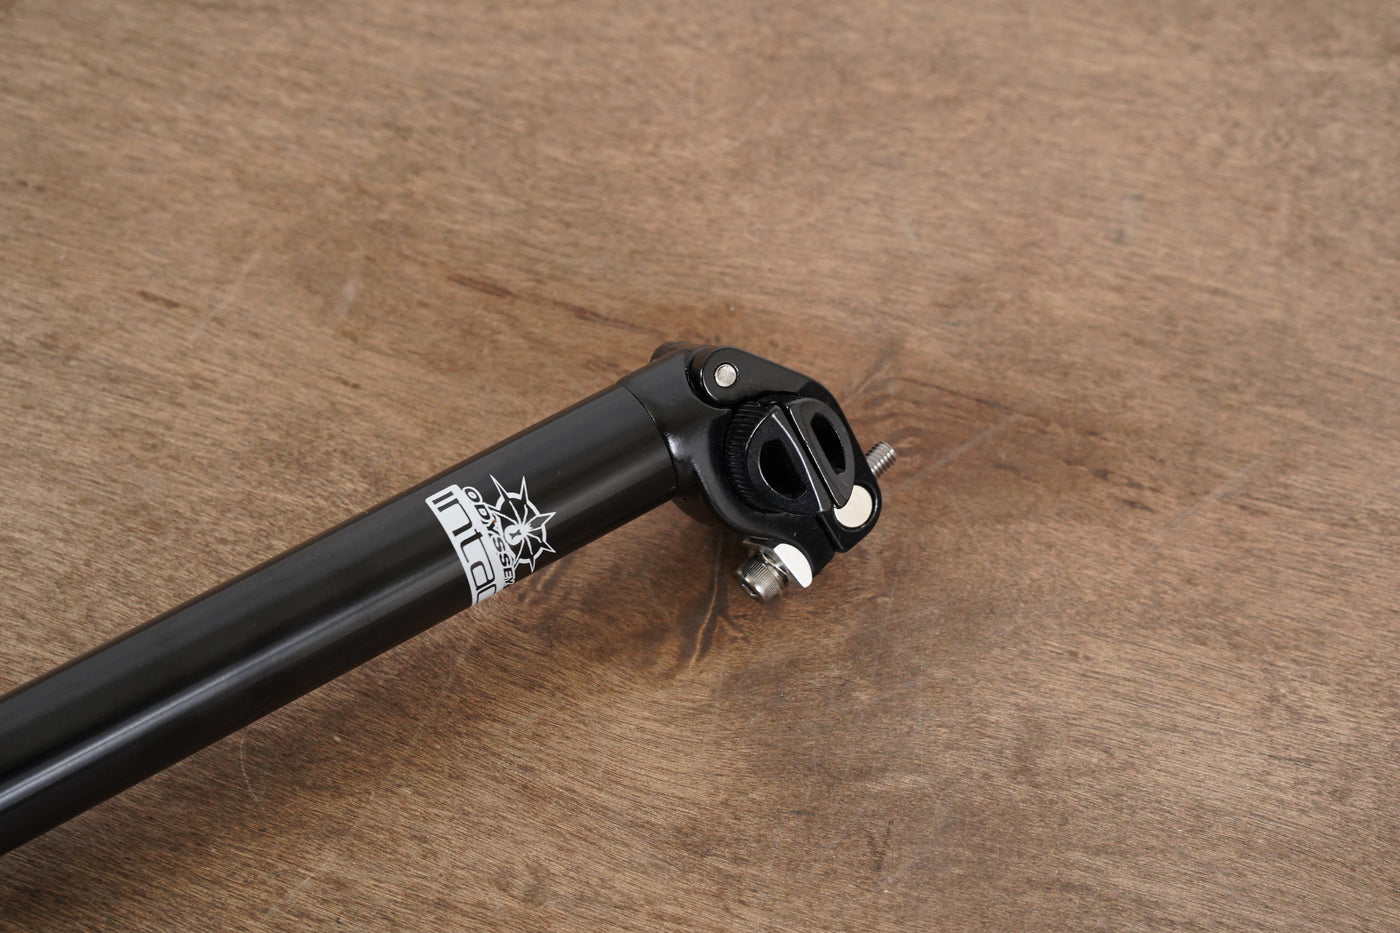 NEW 26.4mm Odyssey Intac Alloy Road Seatpost